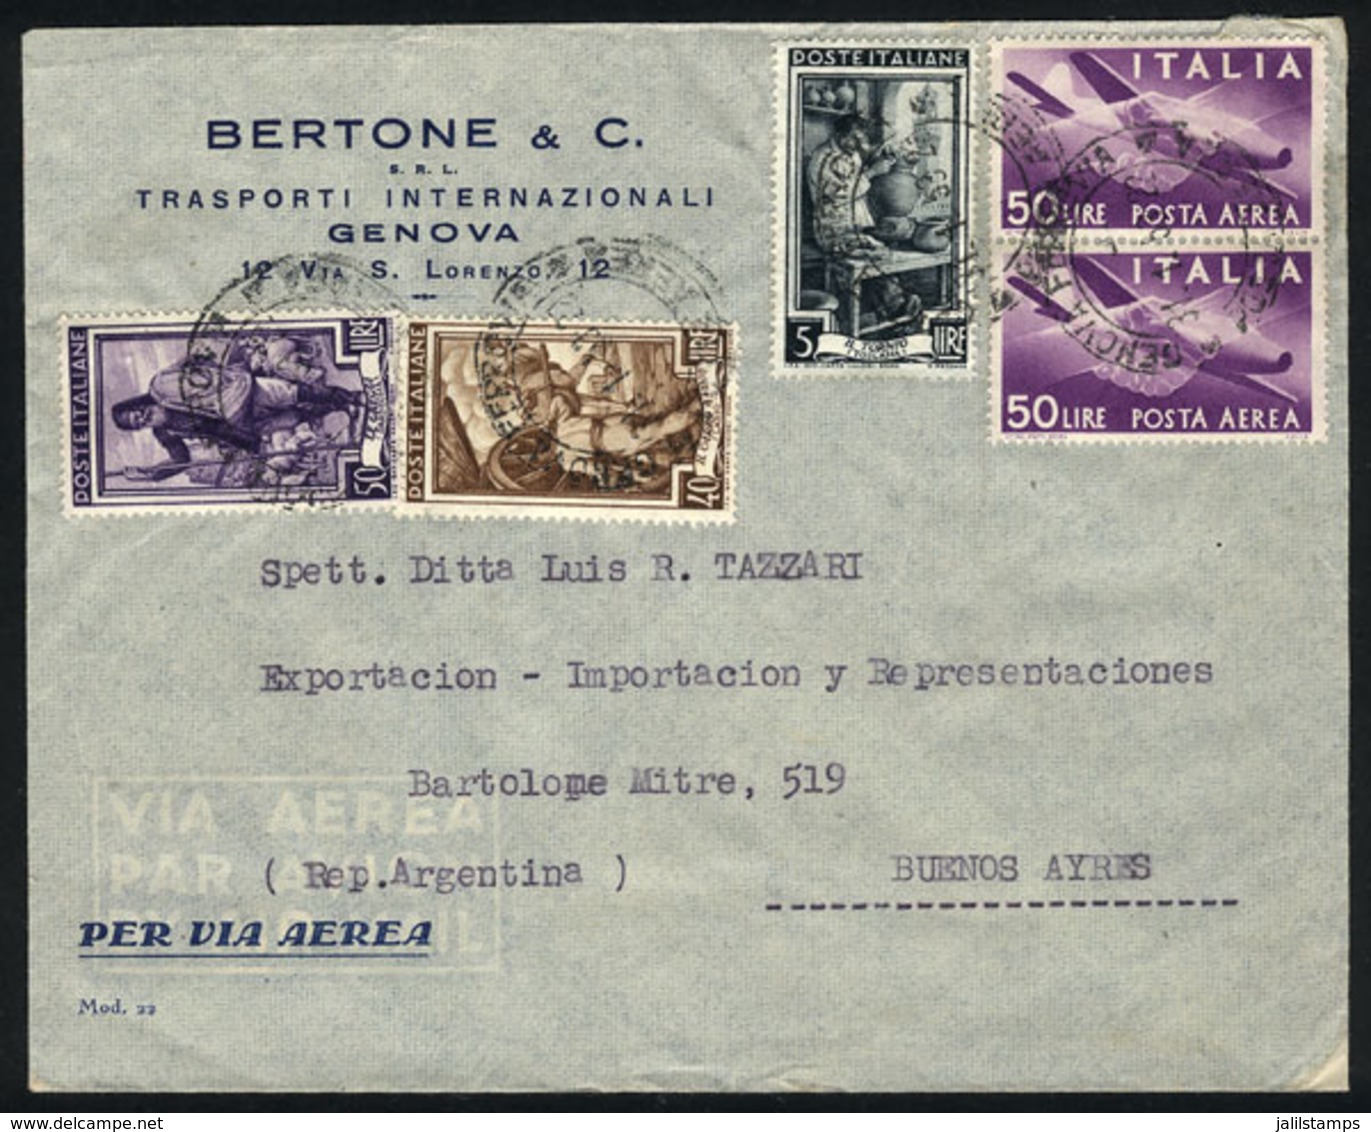 ITALY: Airmail Cover Sent From Genova To Argentina On 31/JA/1953, With Nice Postage Of 195L., VF Quality! - Sin Clasificación